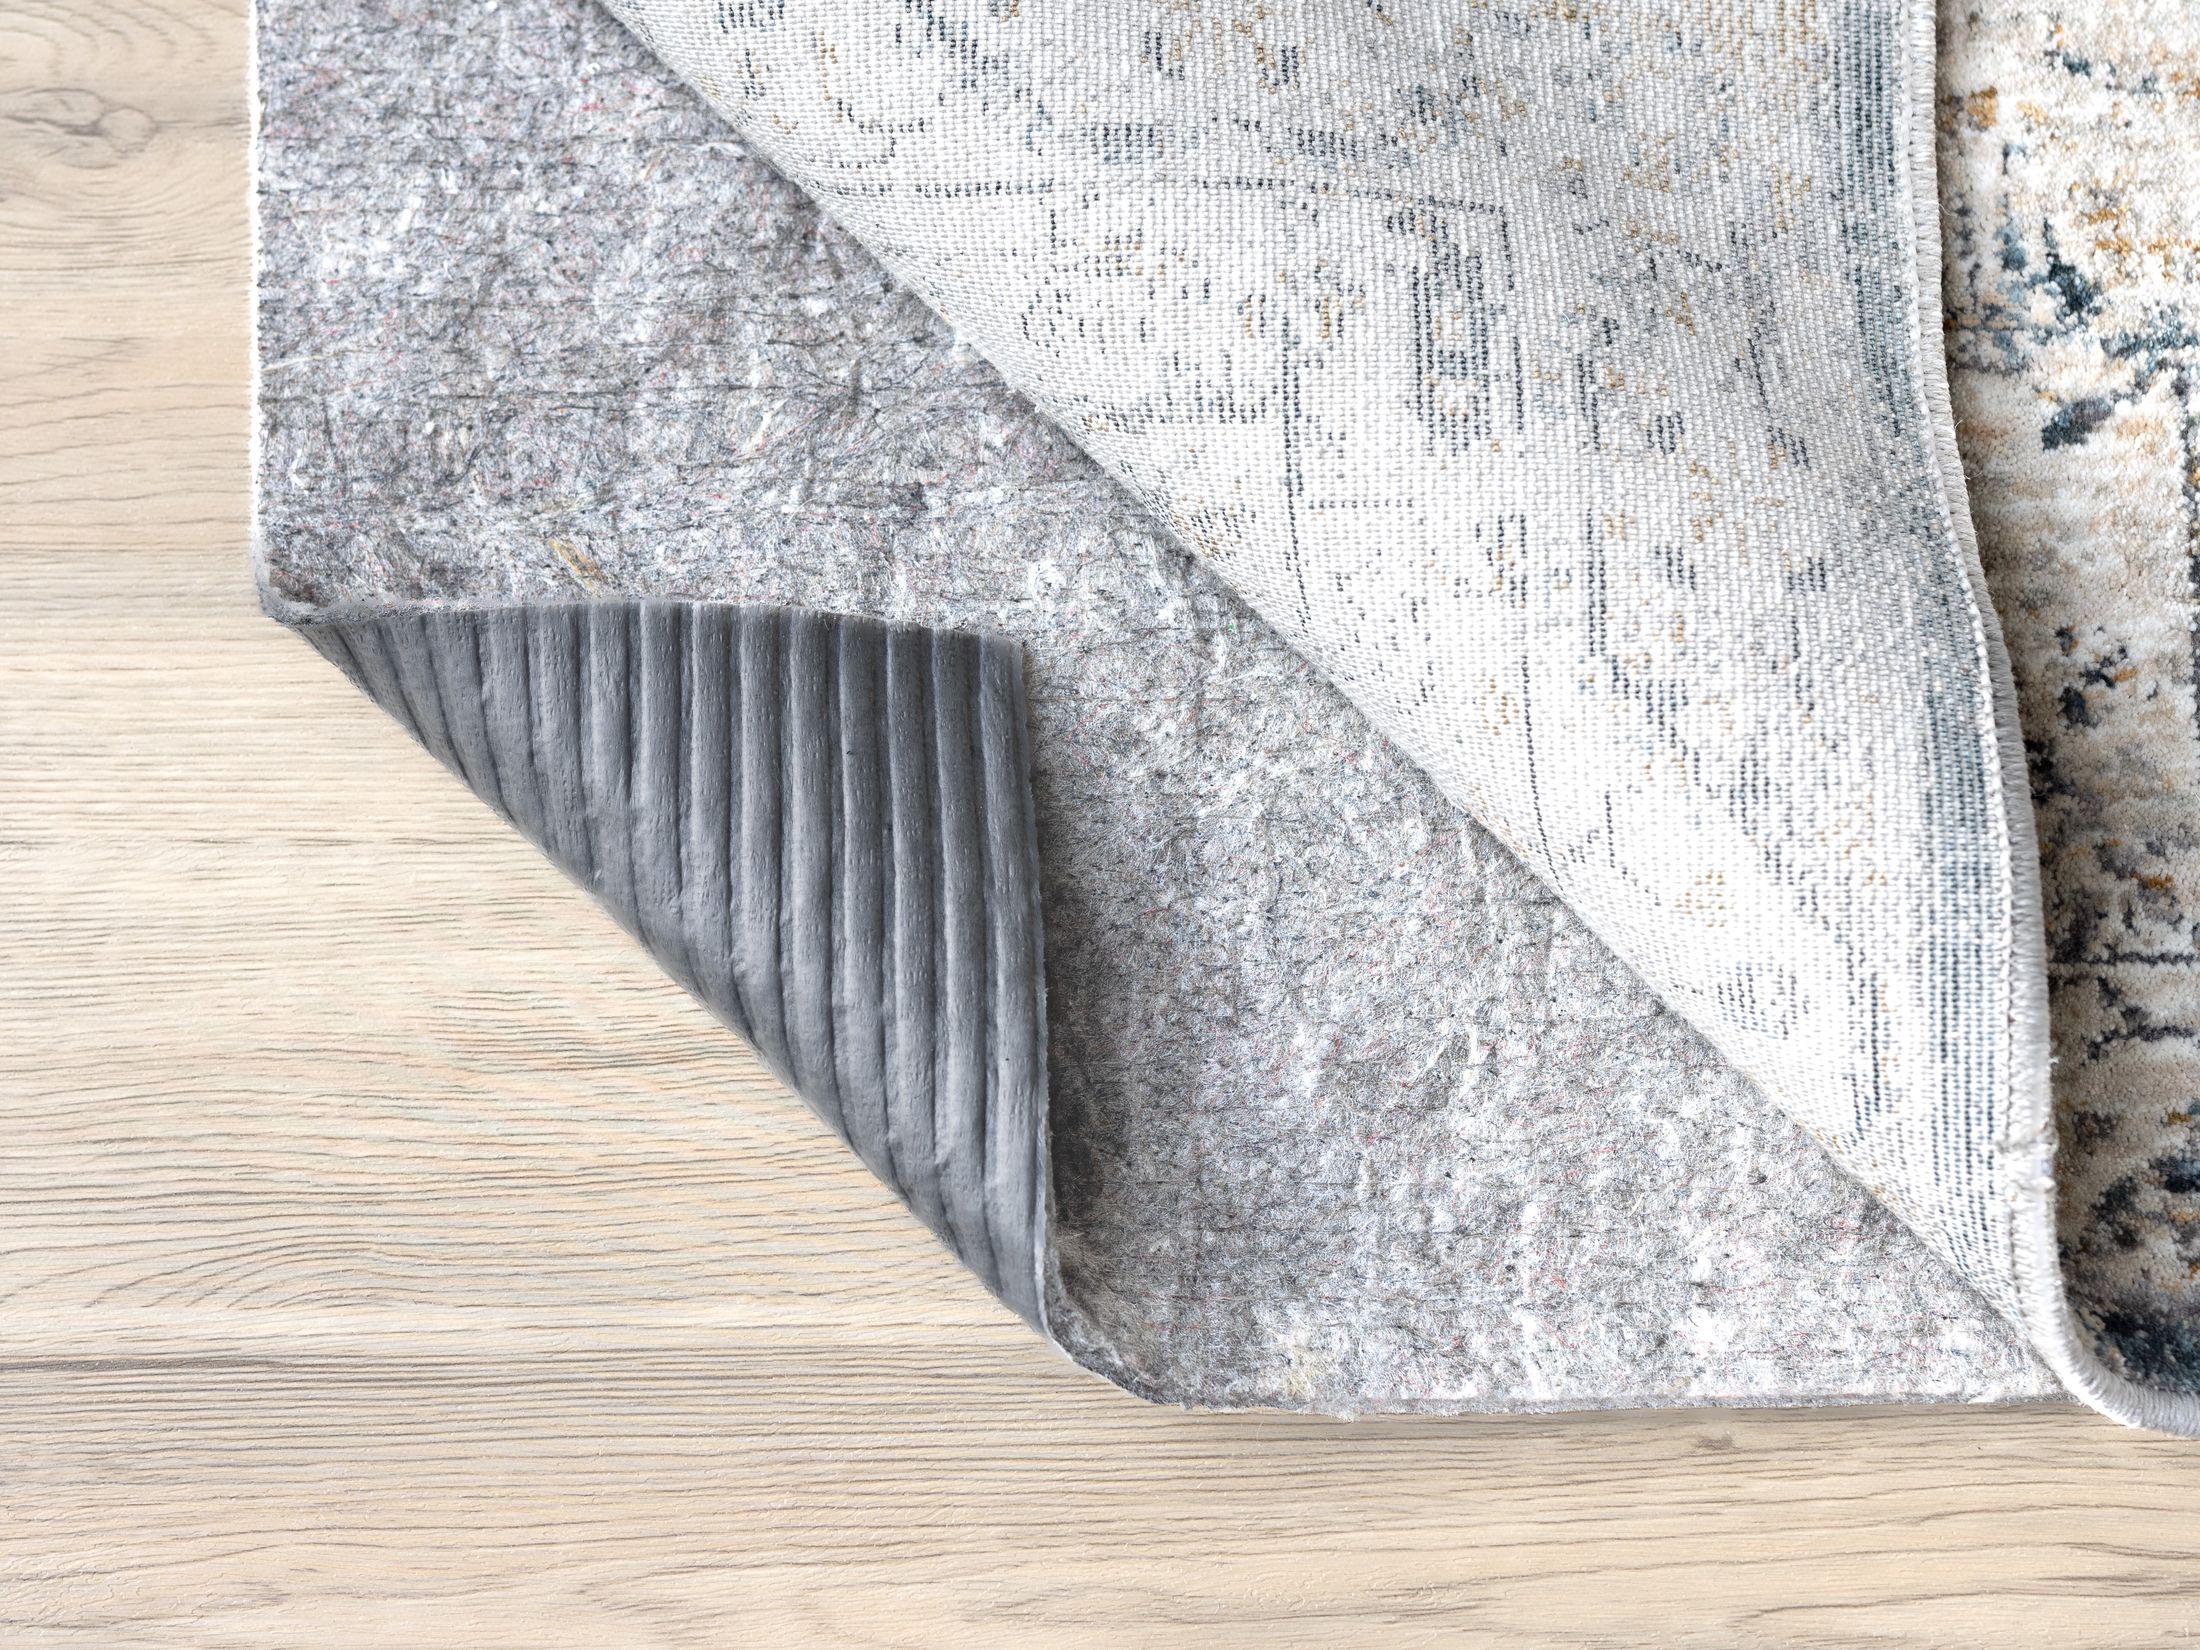 Secure an area rug with Velcro to keep it from sliding around - CNET